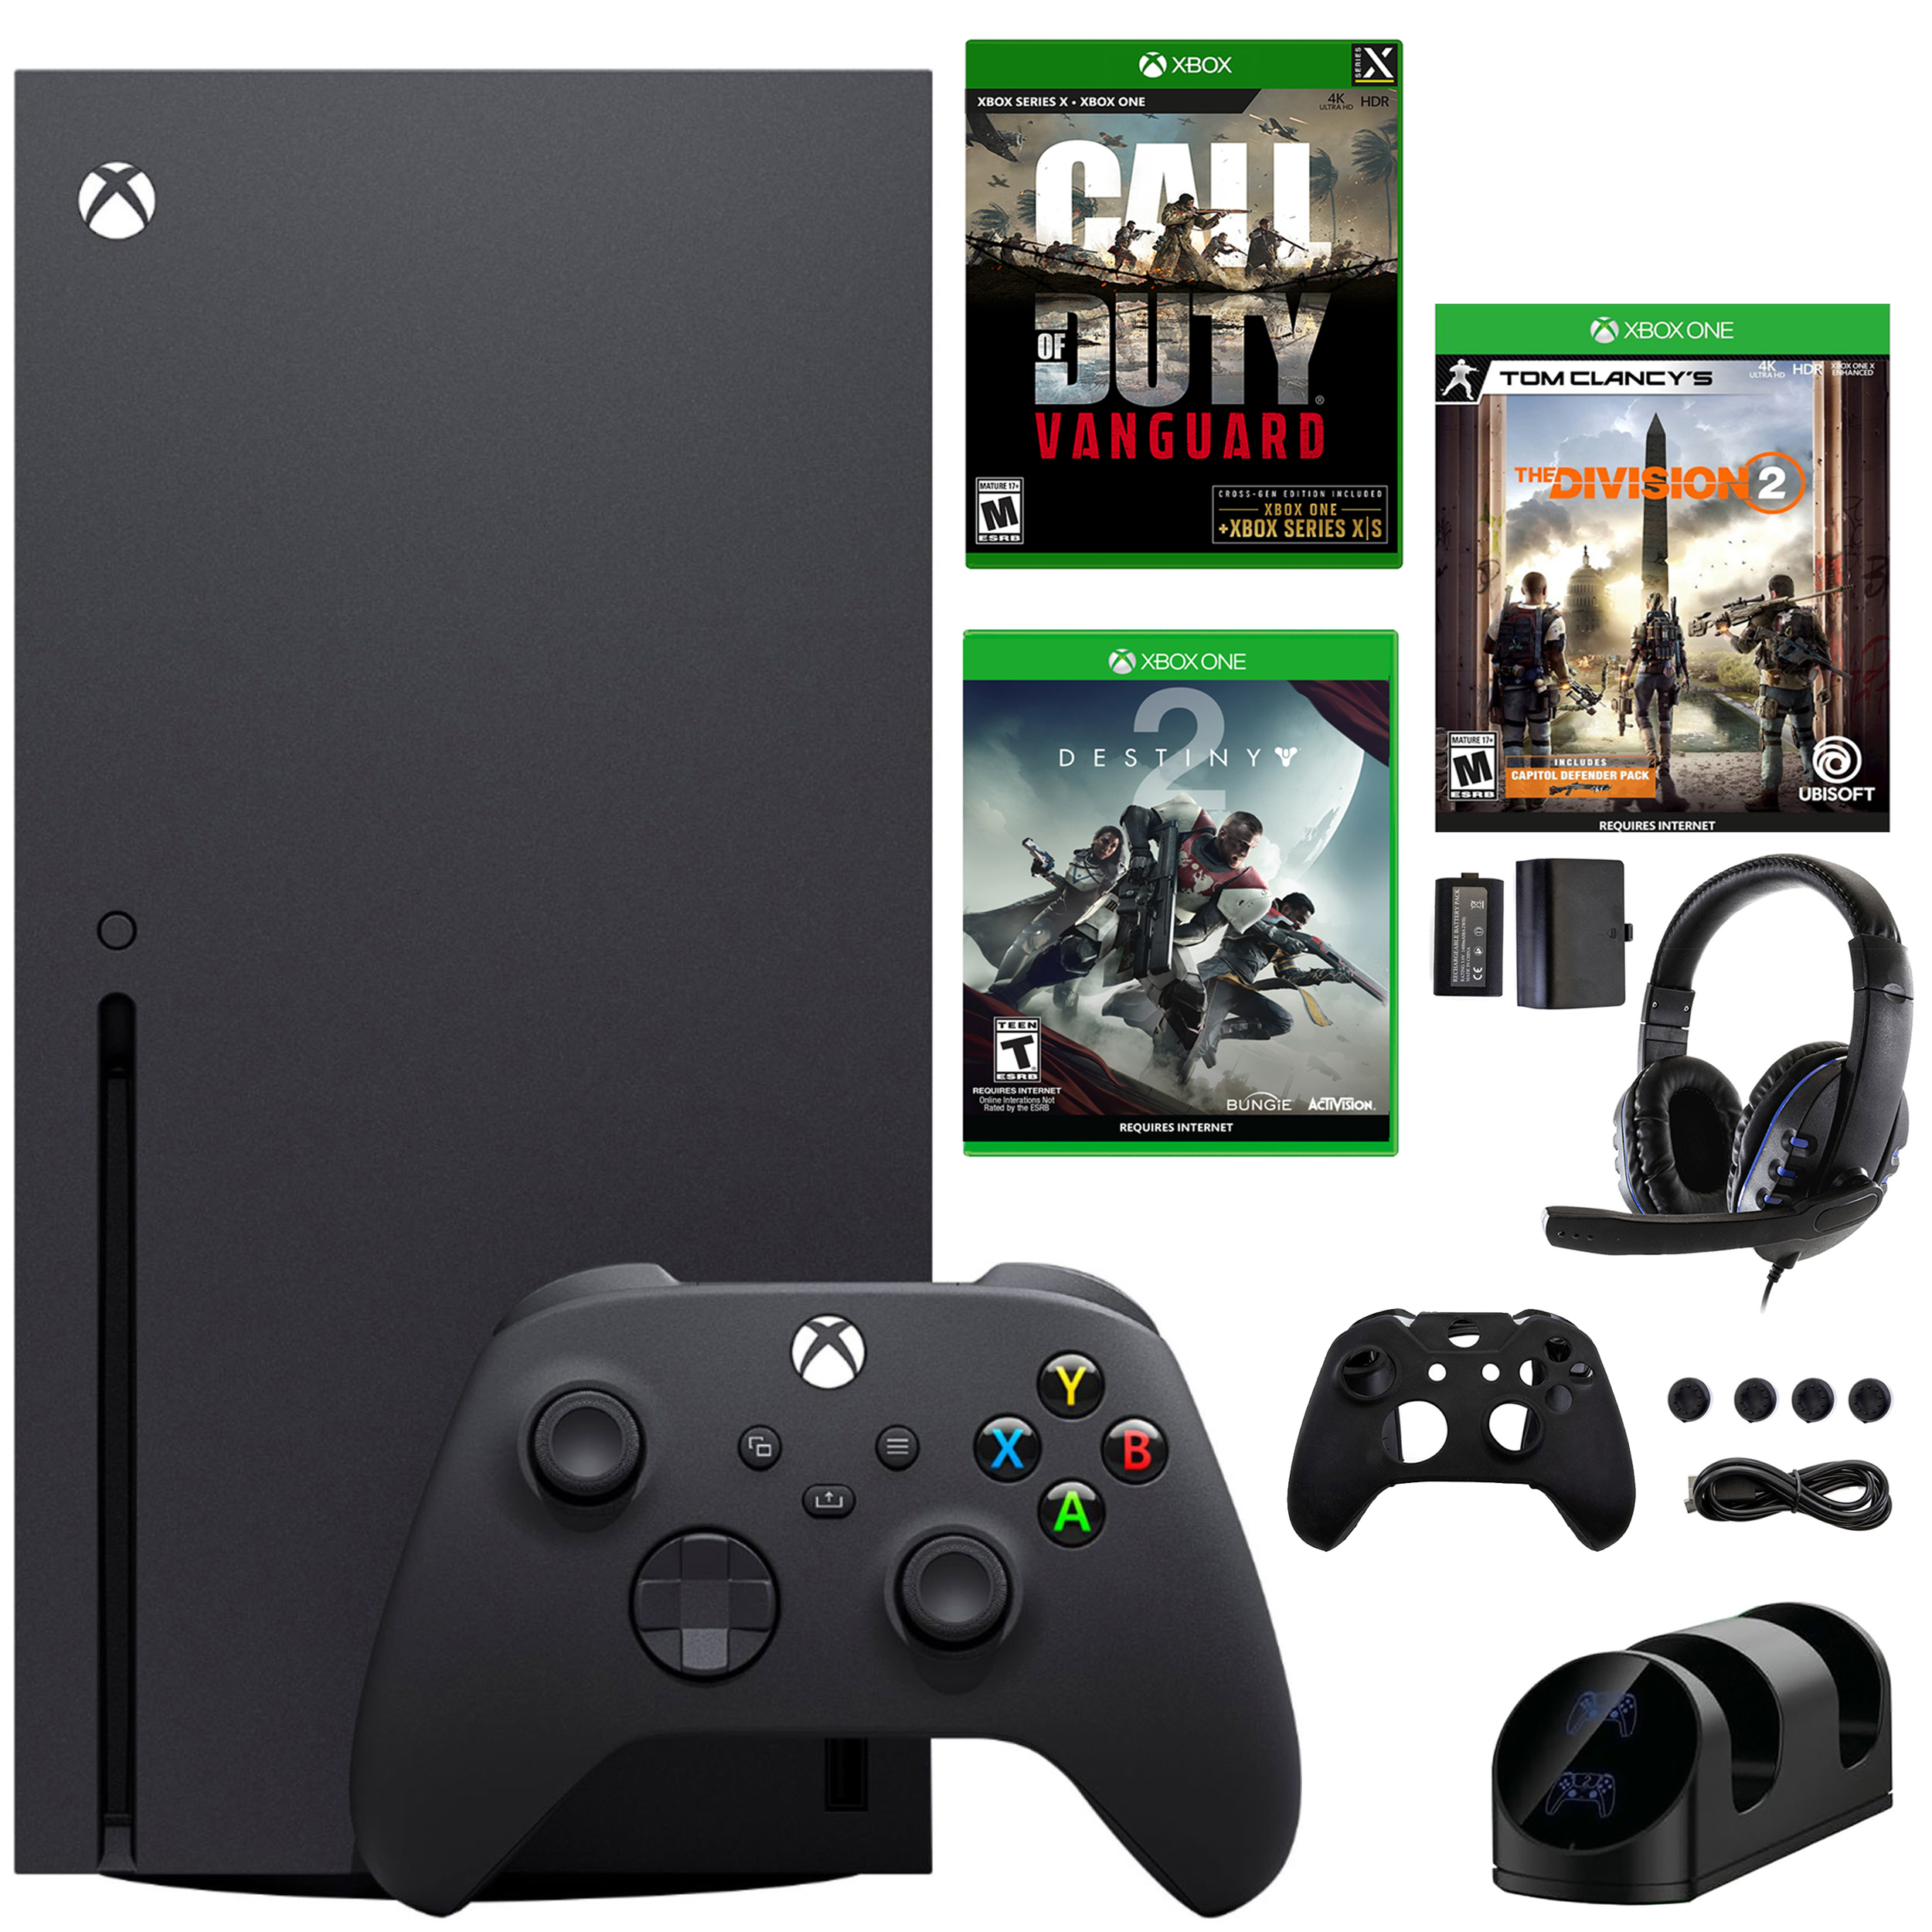 jogger Mellow ondergoed Microsoft Xbox Series X 1TB Console with COD: Vanguard and Accessories Kit